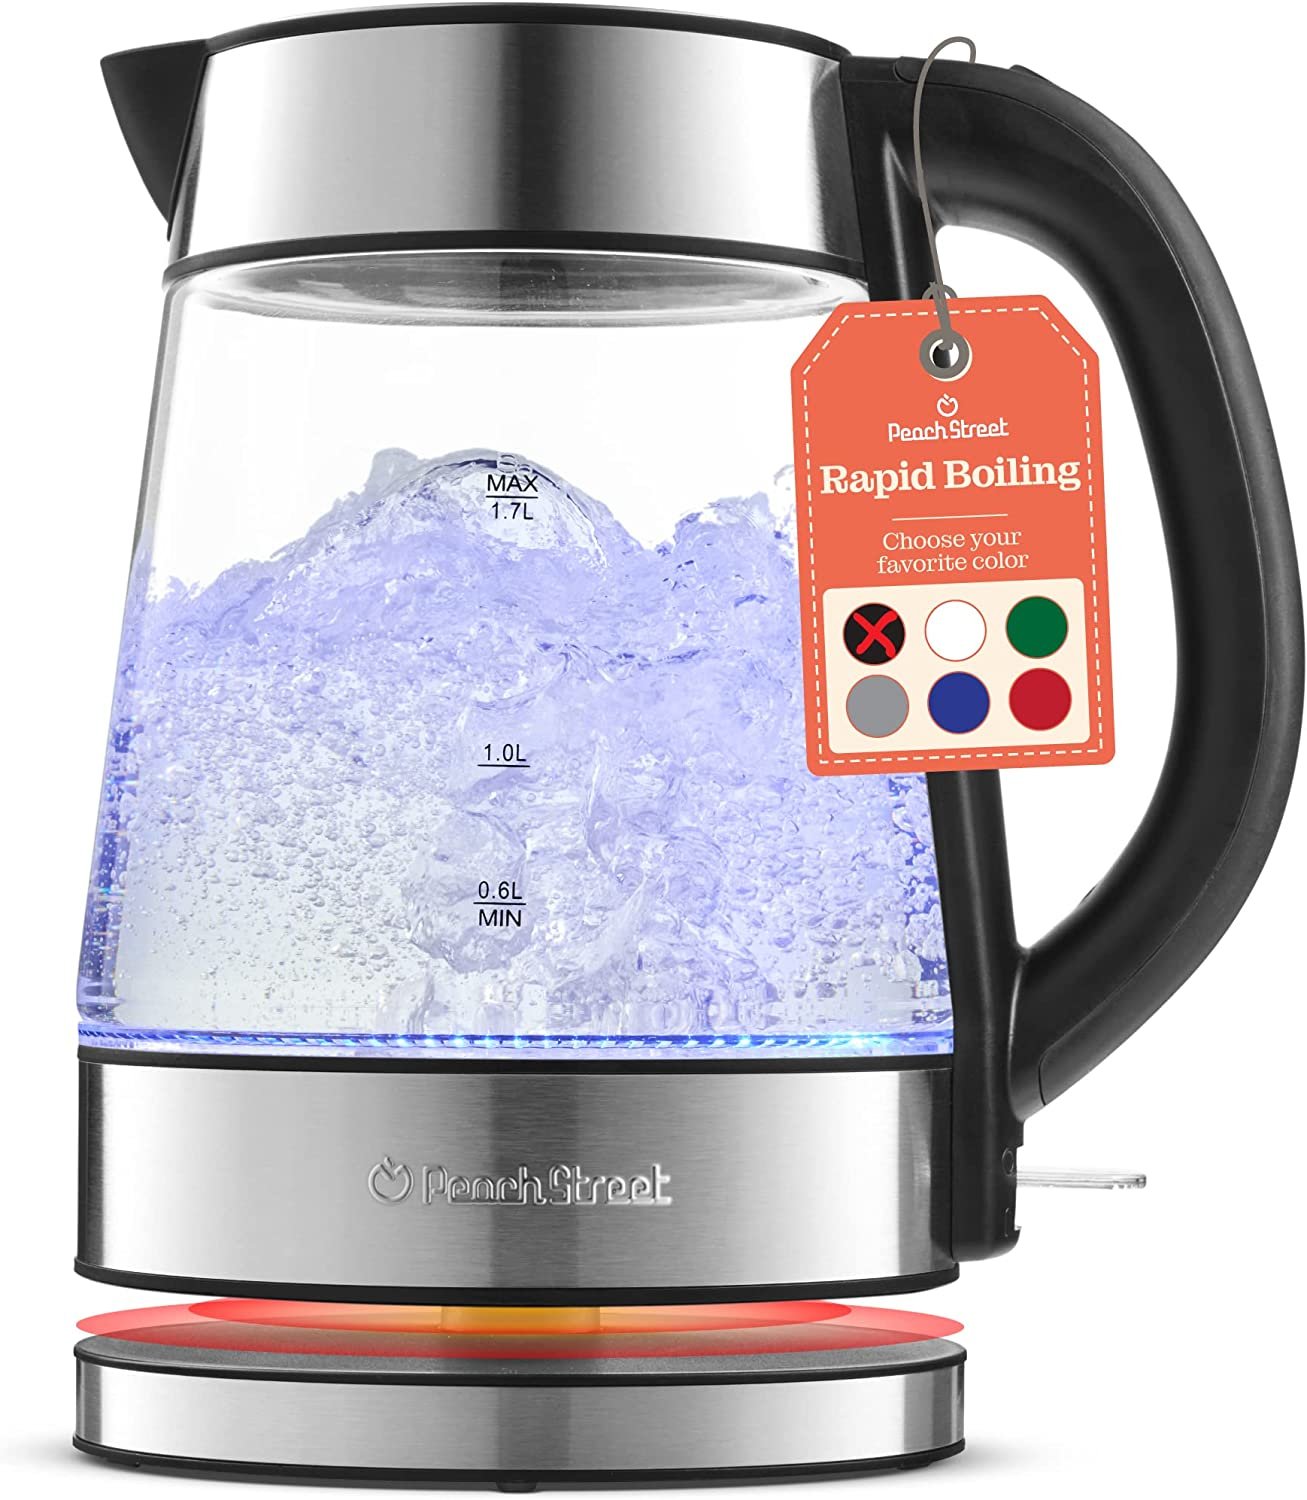 Speed-Boil Water Electric Kettle, 1.7L 1500W, Coffee & Tea Kettle Borosilicate Glass, Wide Opening, Auto Shut-Off, Cool Touch Handle, LED Light. 360° Rotation, Boil Dry Protection